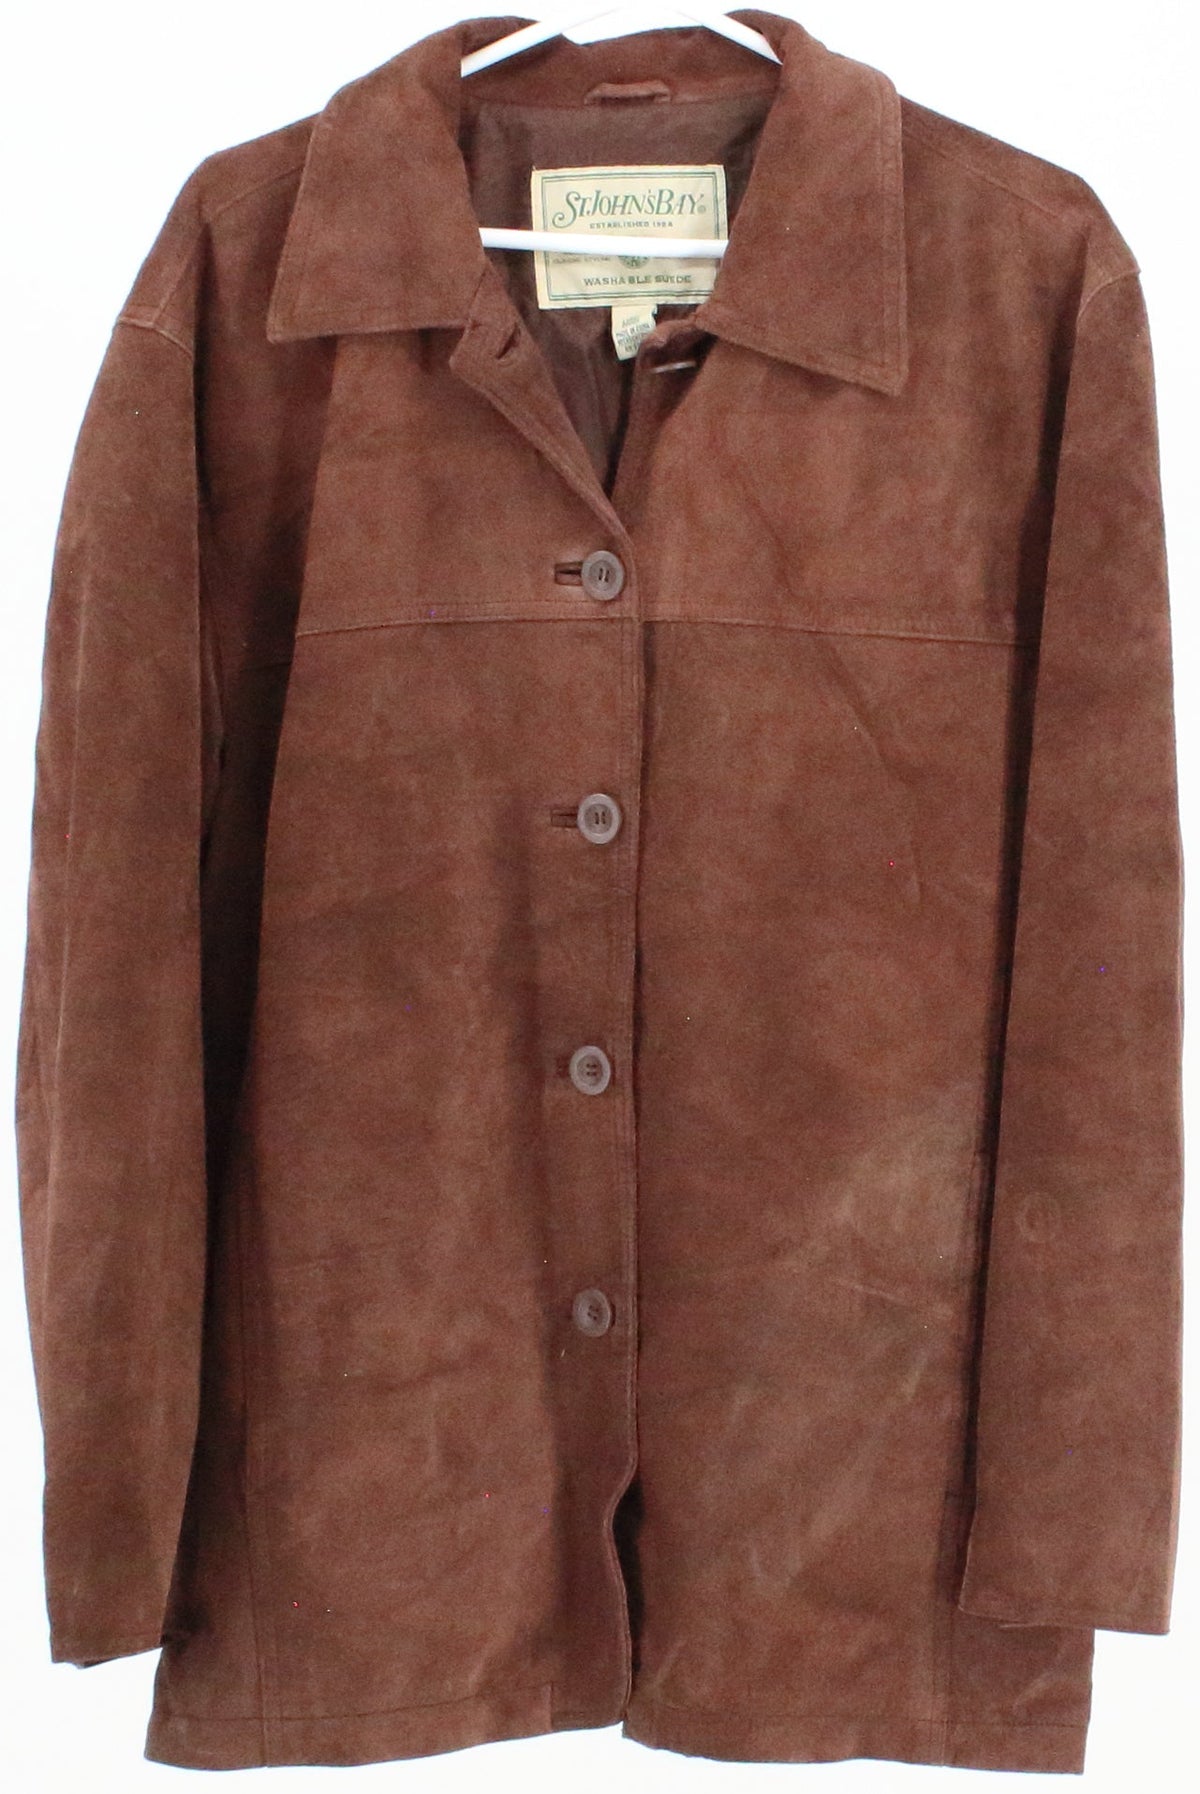 St. John's Bay Women's Brown Leather Jacket Washable Suede